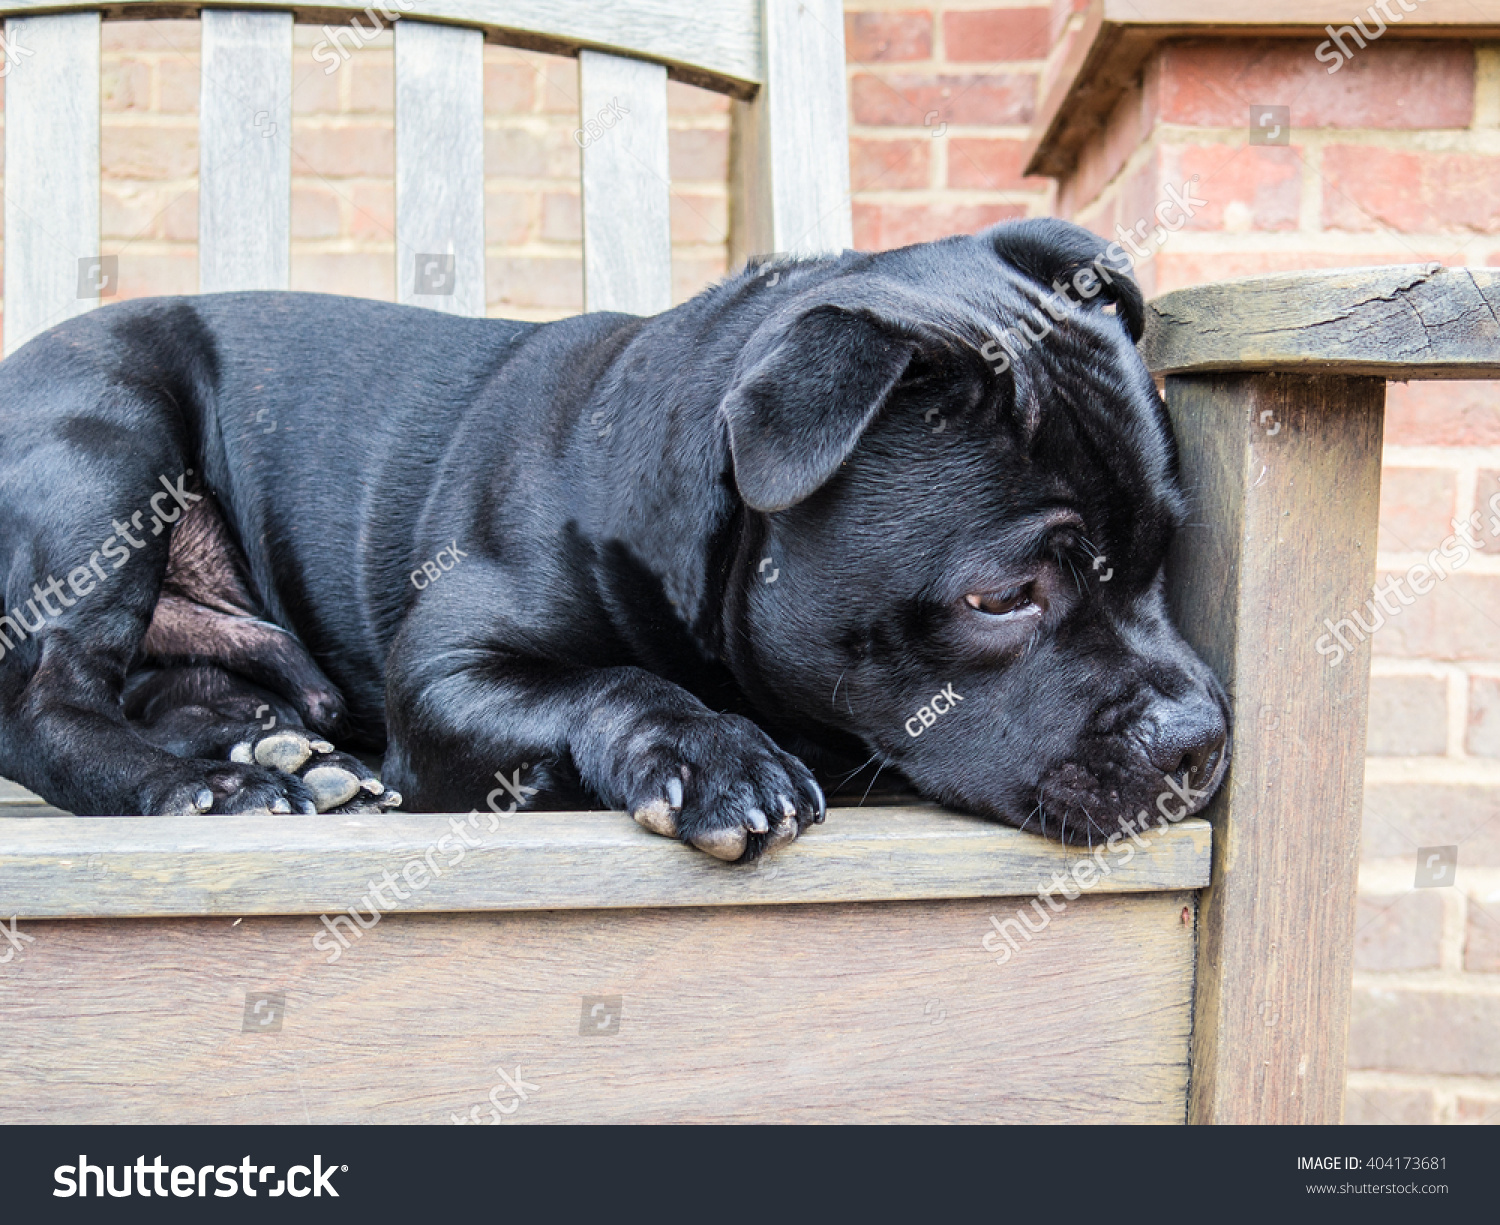 Staffordshire Bull Terrier Black Brindle 8 Stock Photo Edit Now 404173681